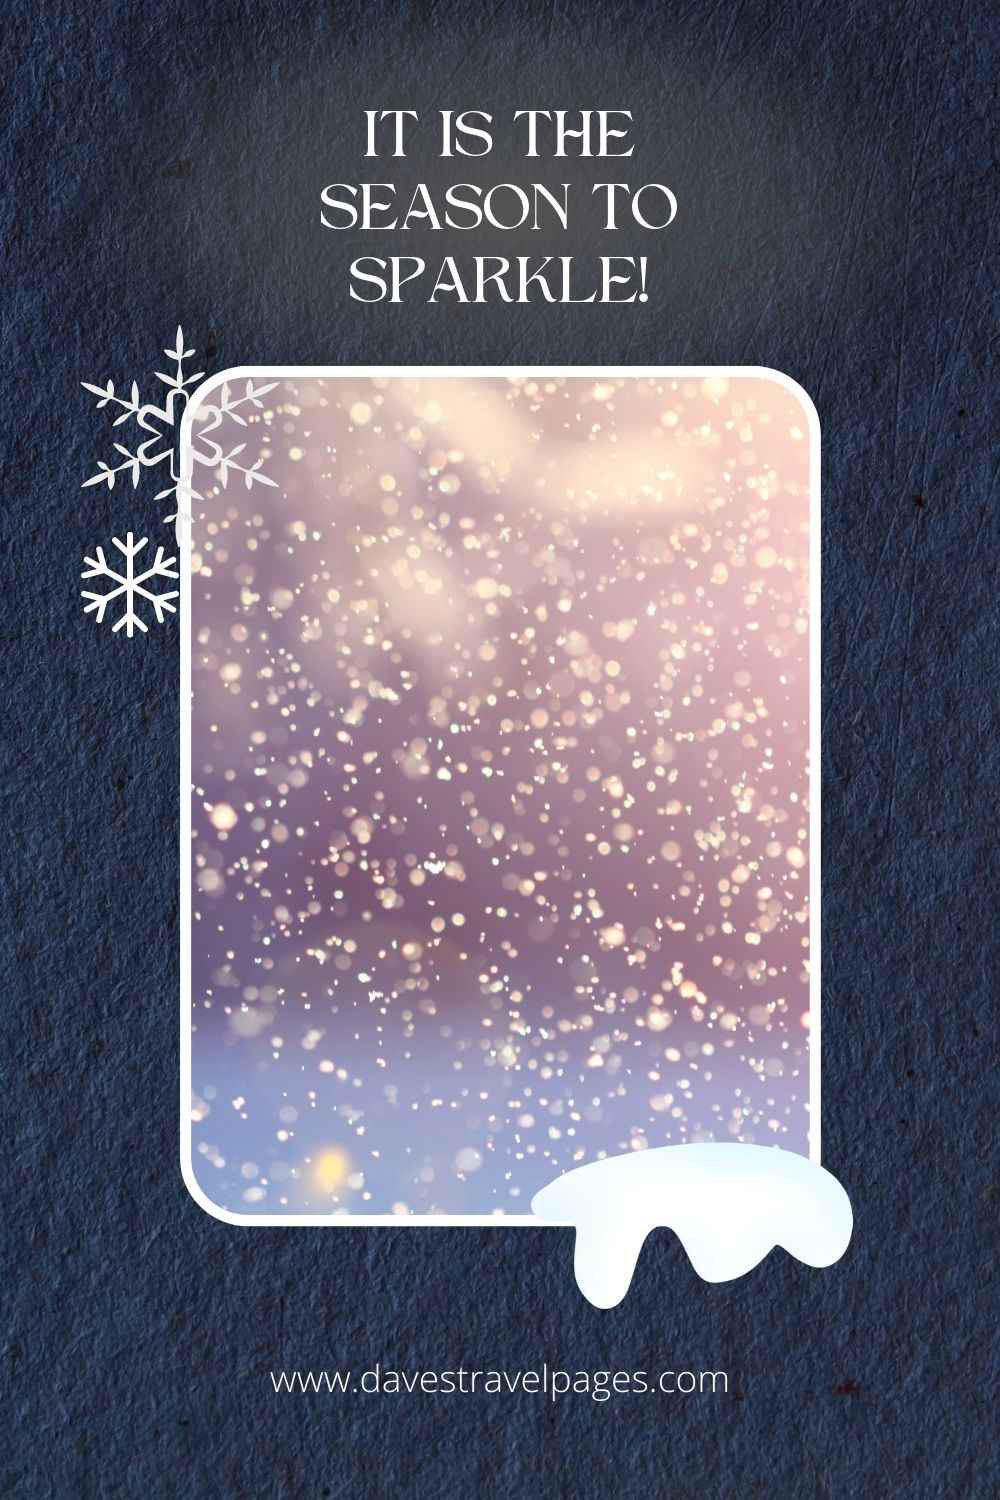 It is the season to sparkle!